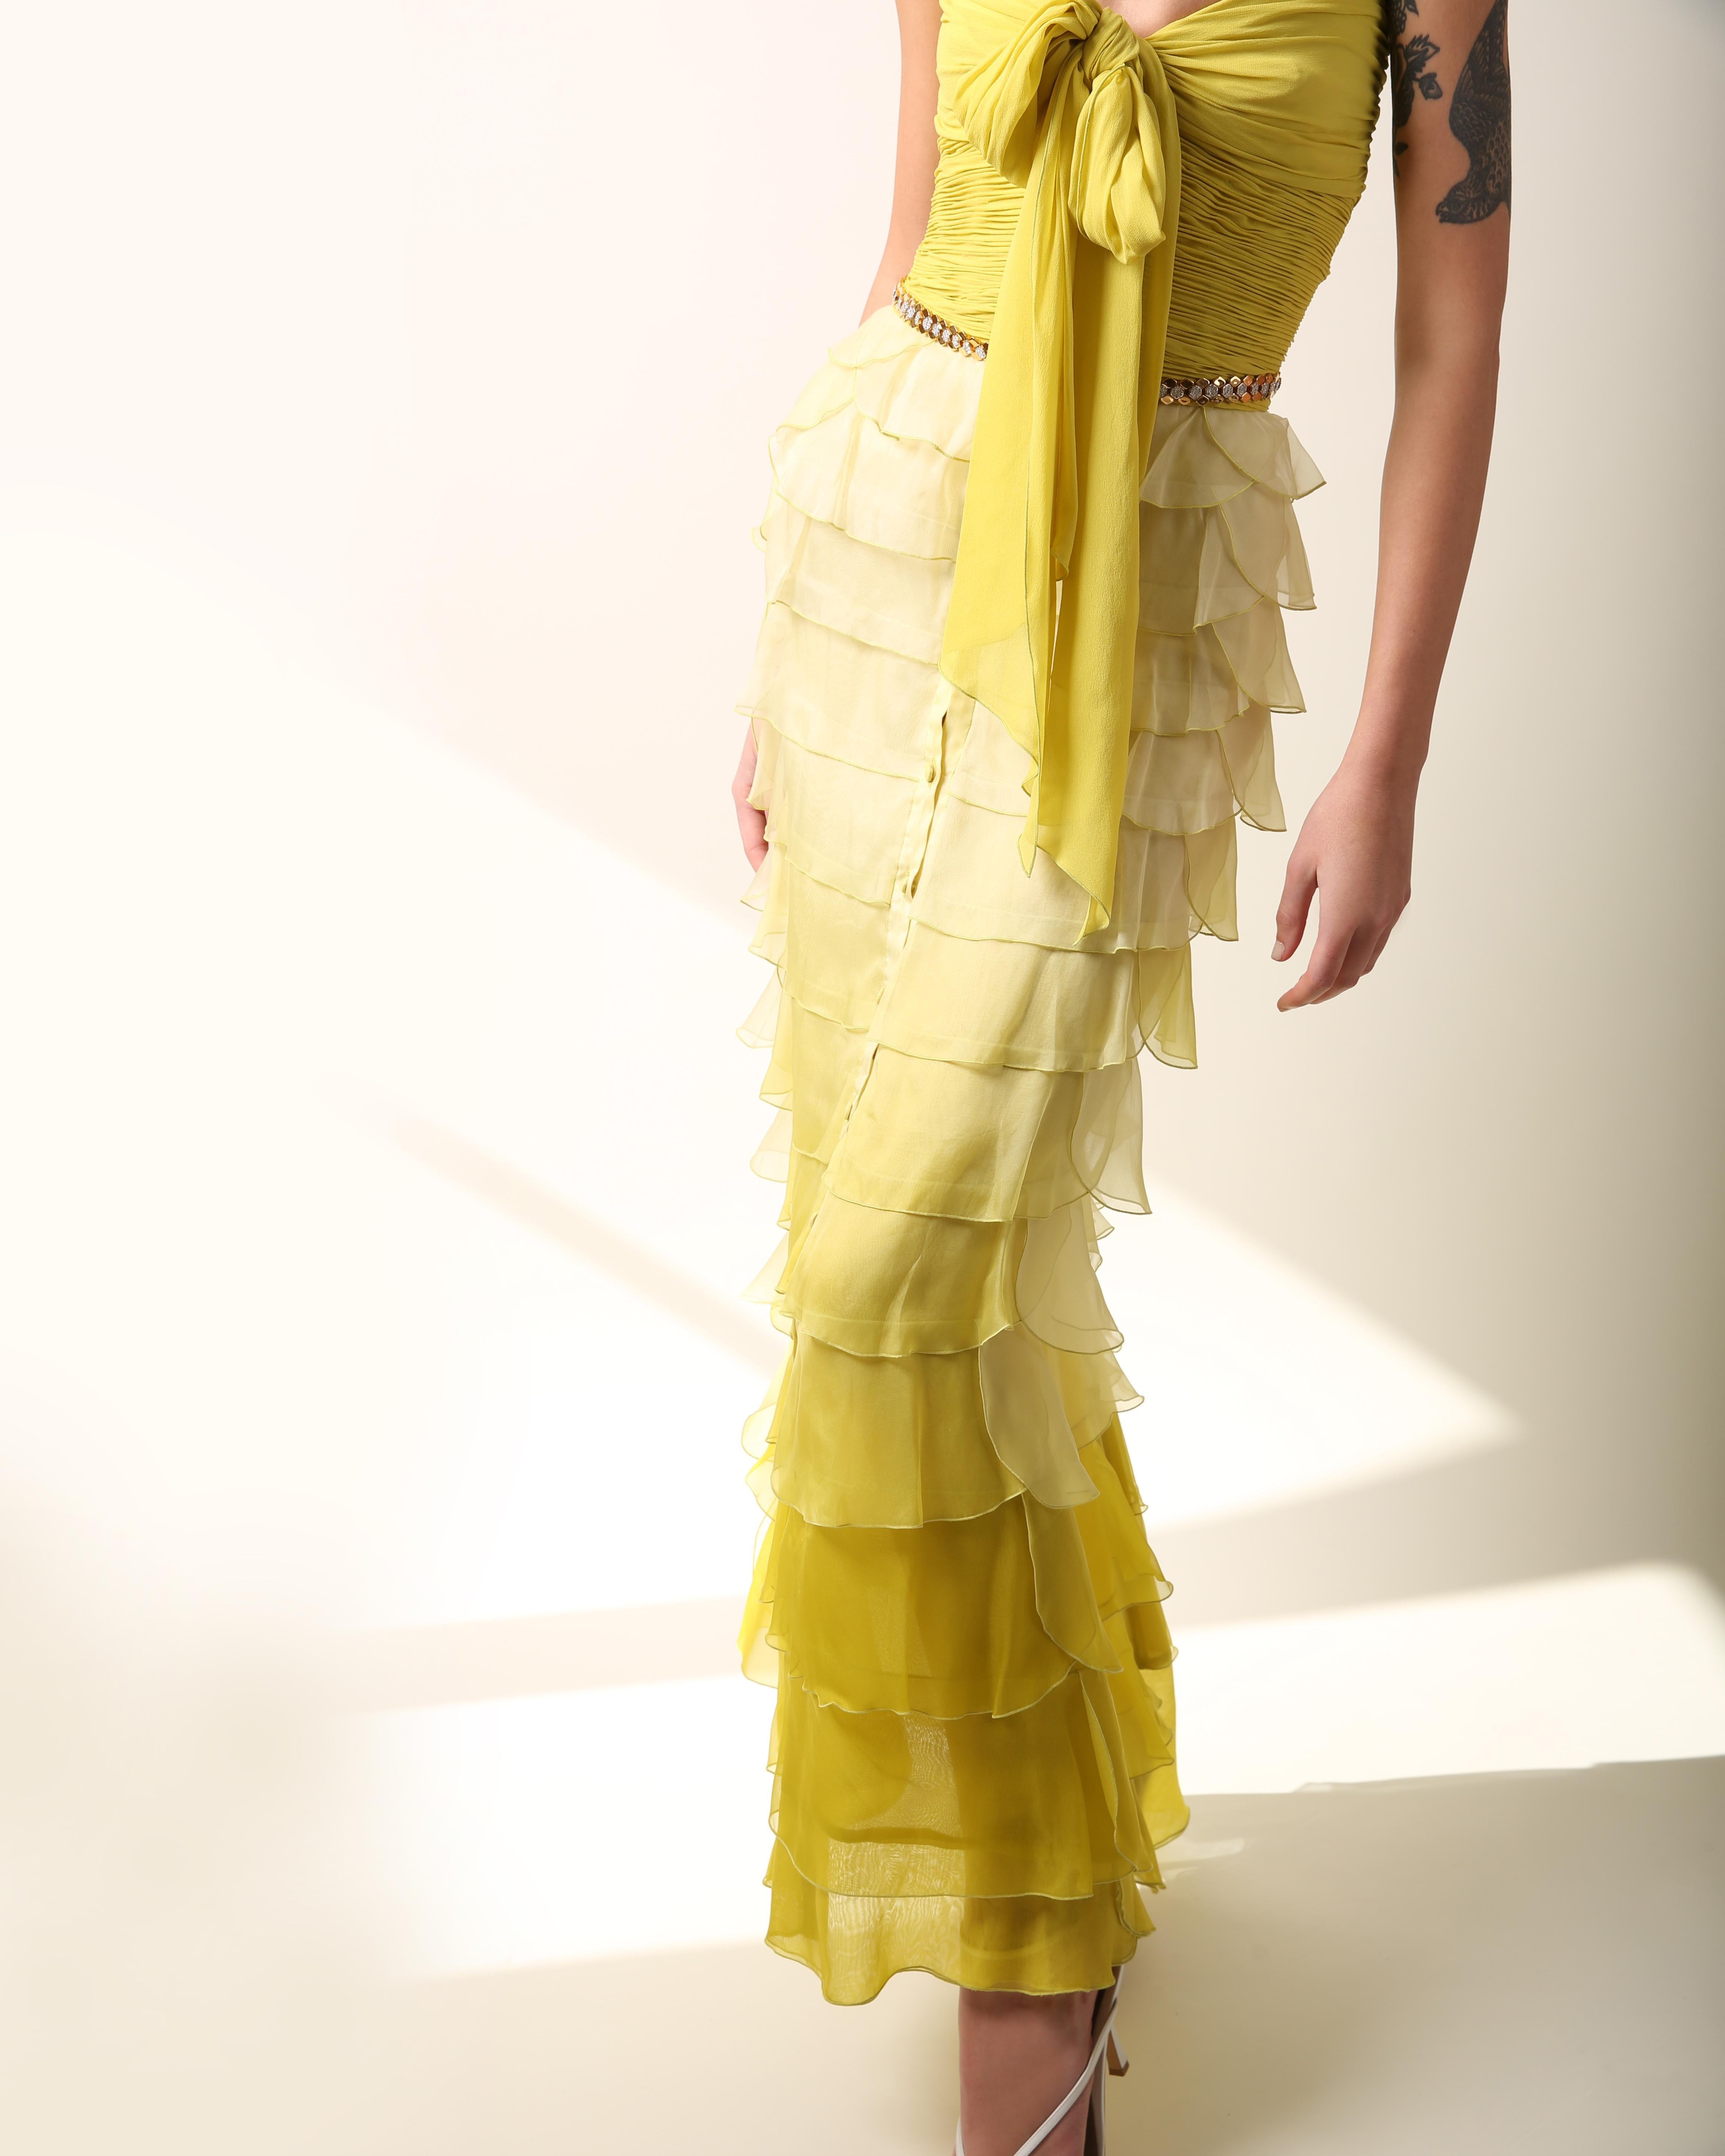 Yellow Valentino S/S 2005 yellow chartreuse strapless ruffle bustier silk gown dress